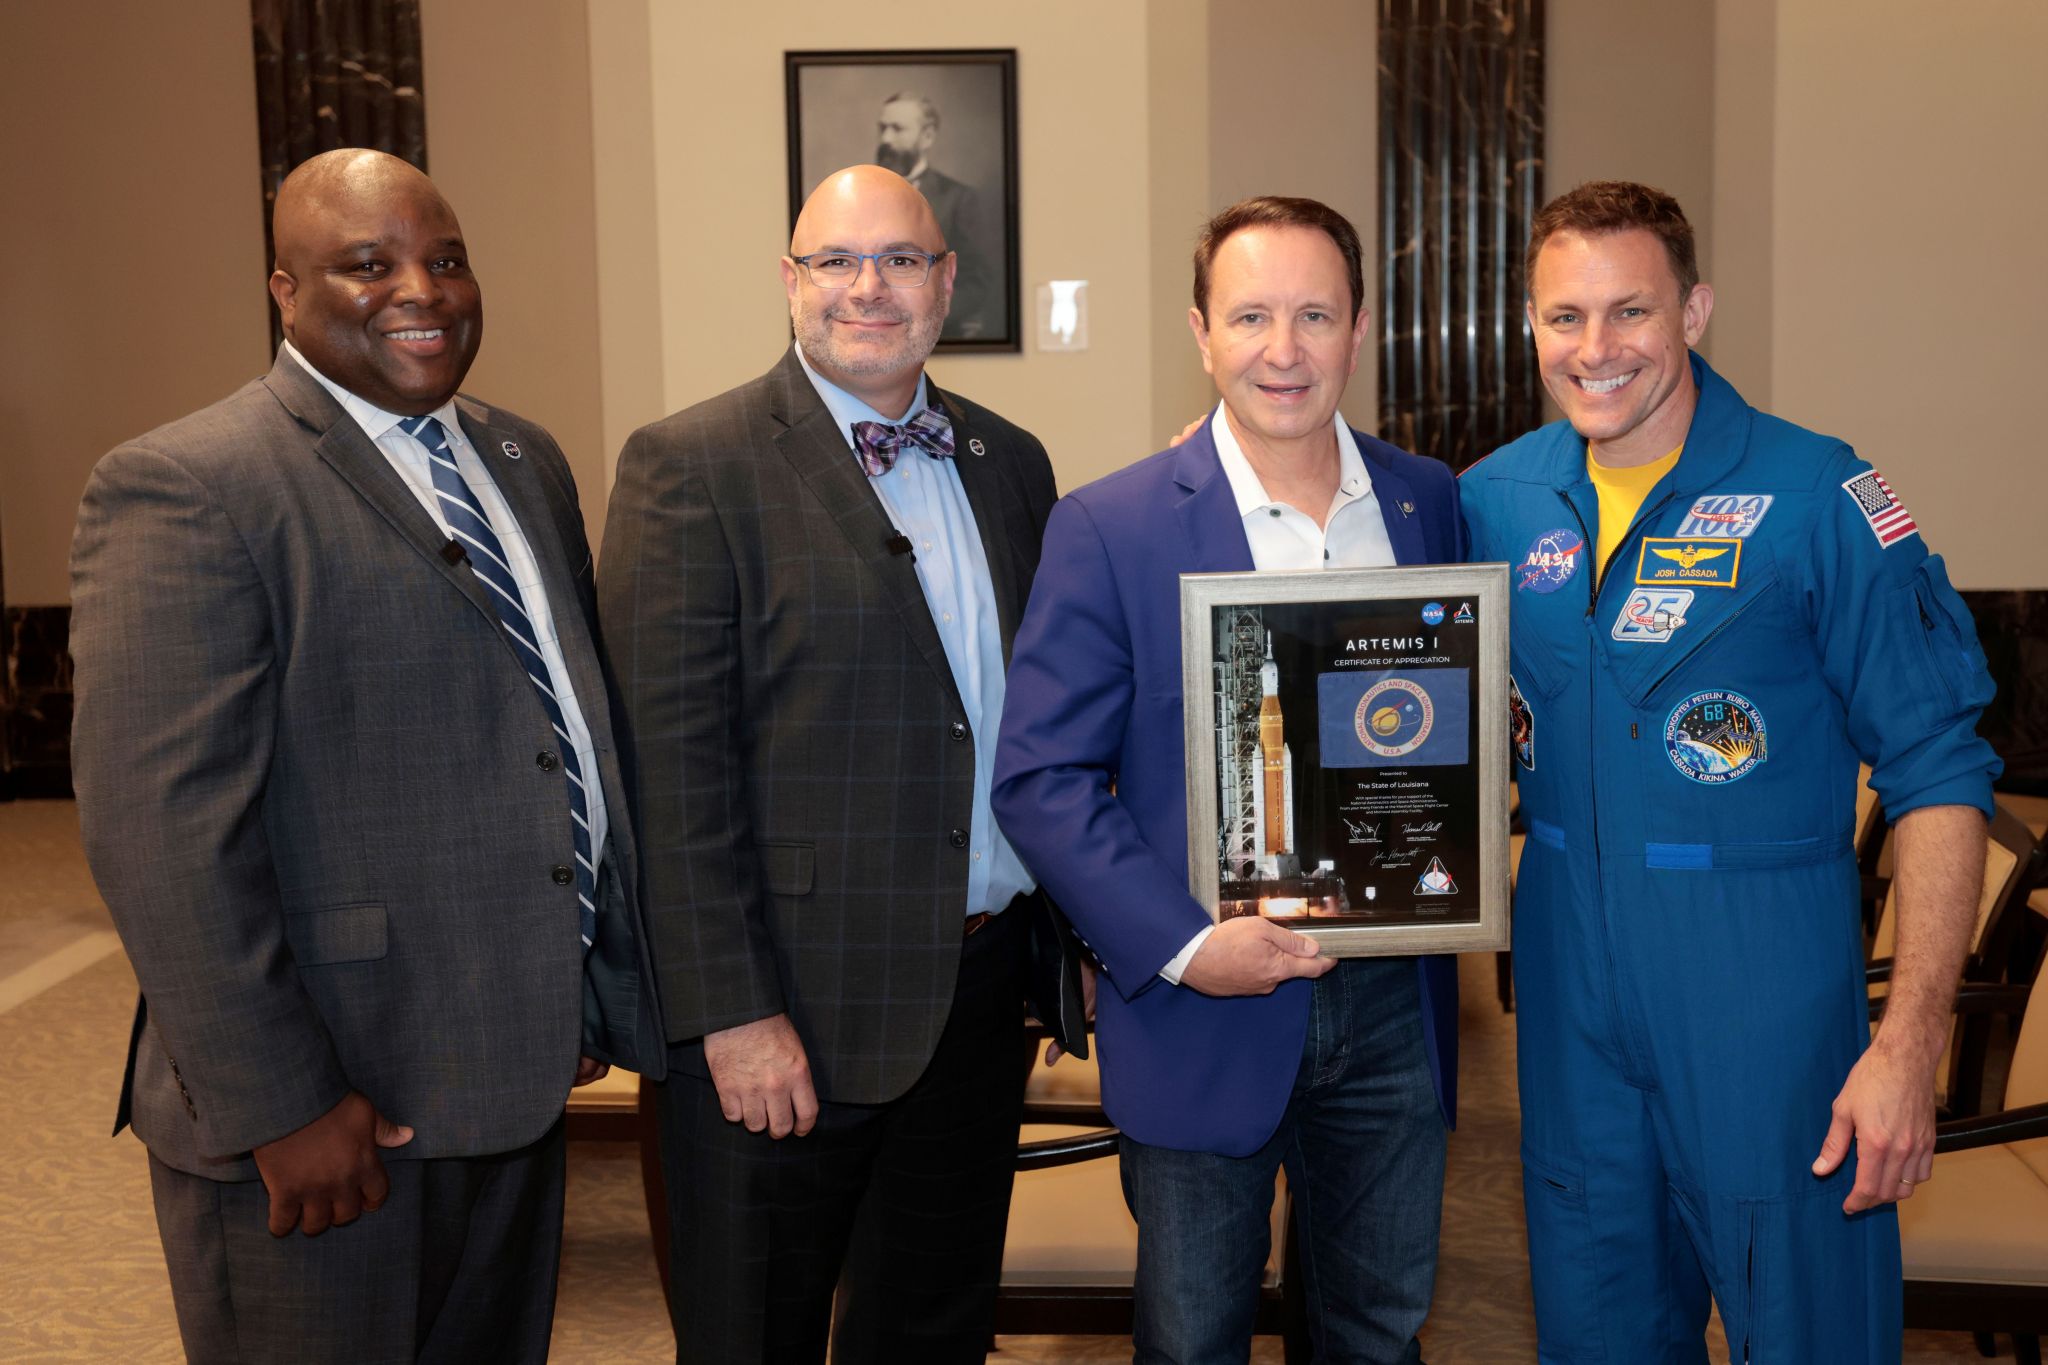 From left, NASA Michoud Assembly Facility Director Hansel Gill, Pelfrey, Louisiana Gov. Jeff Landry, and Cassada pose with an Artemis I-flown flag presented to the governor during Louisiana Space Day.